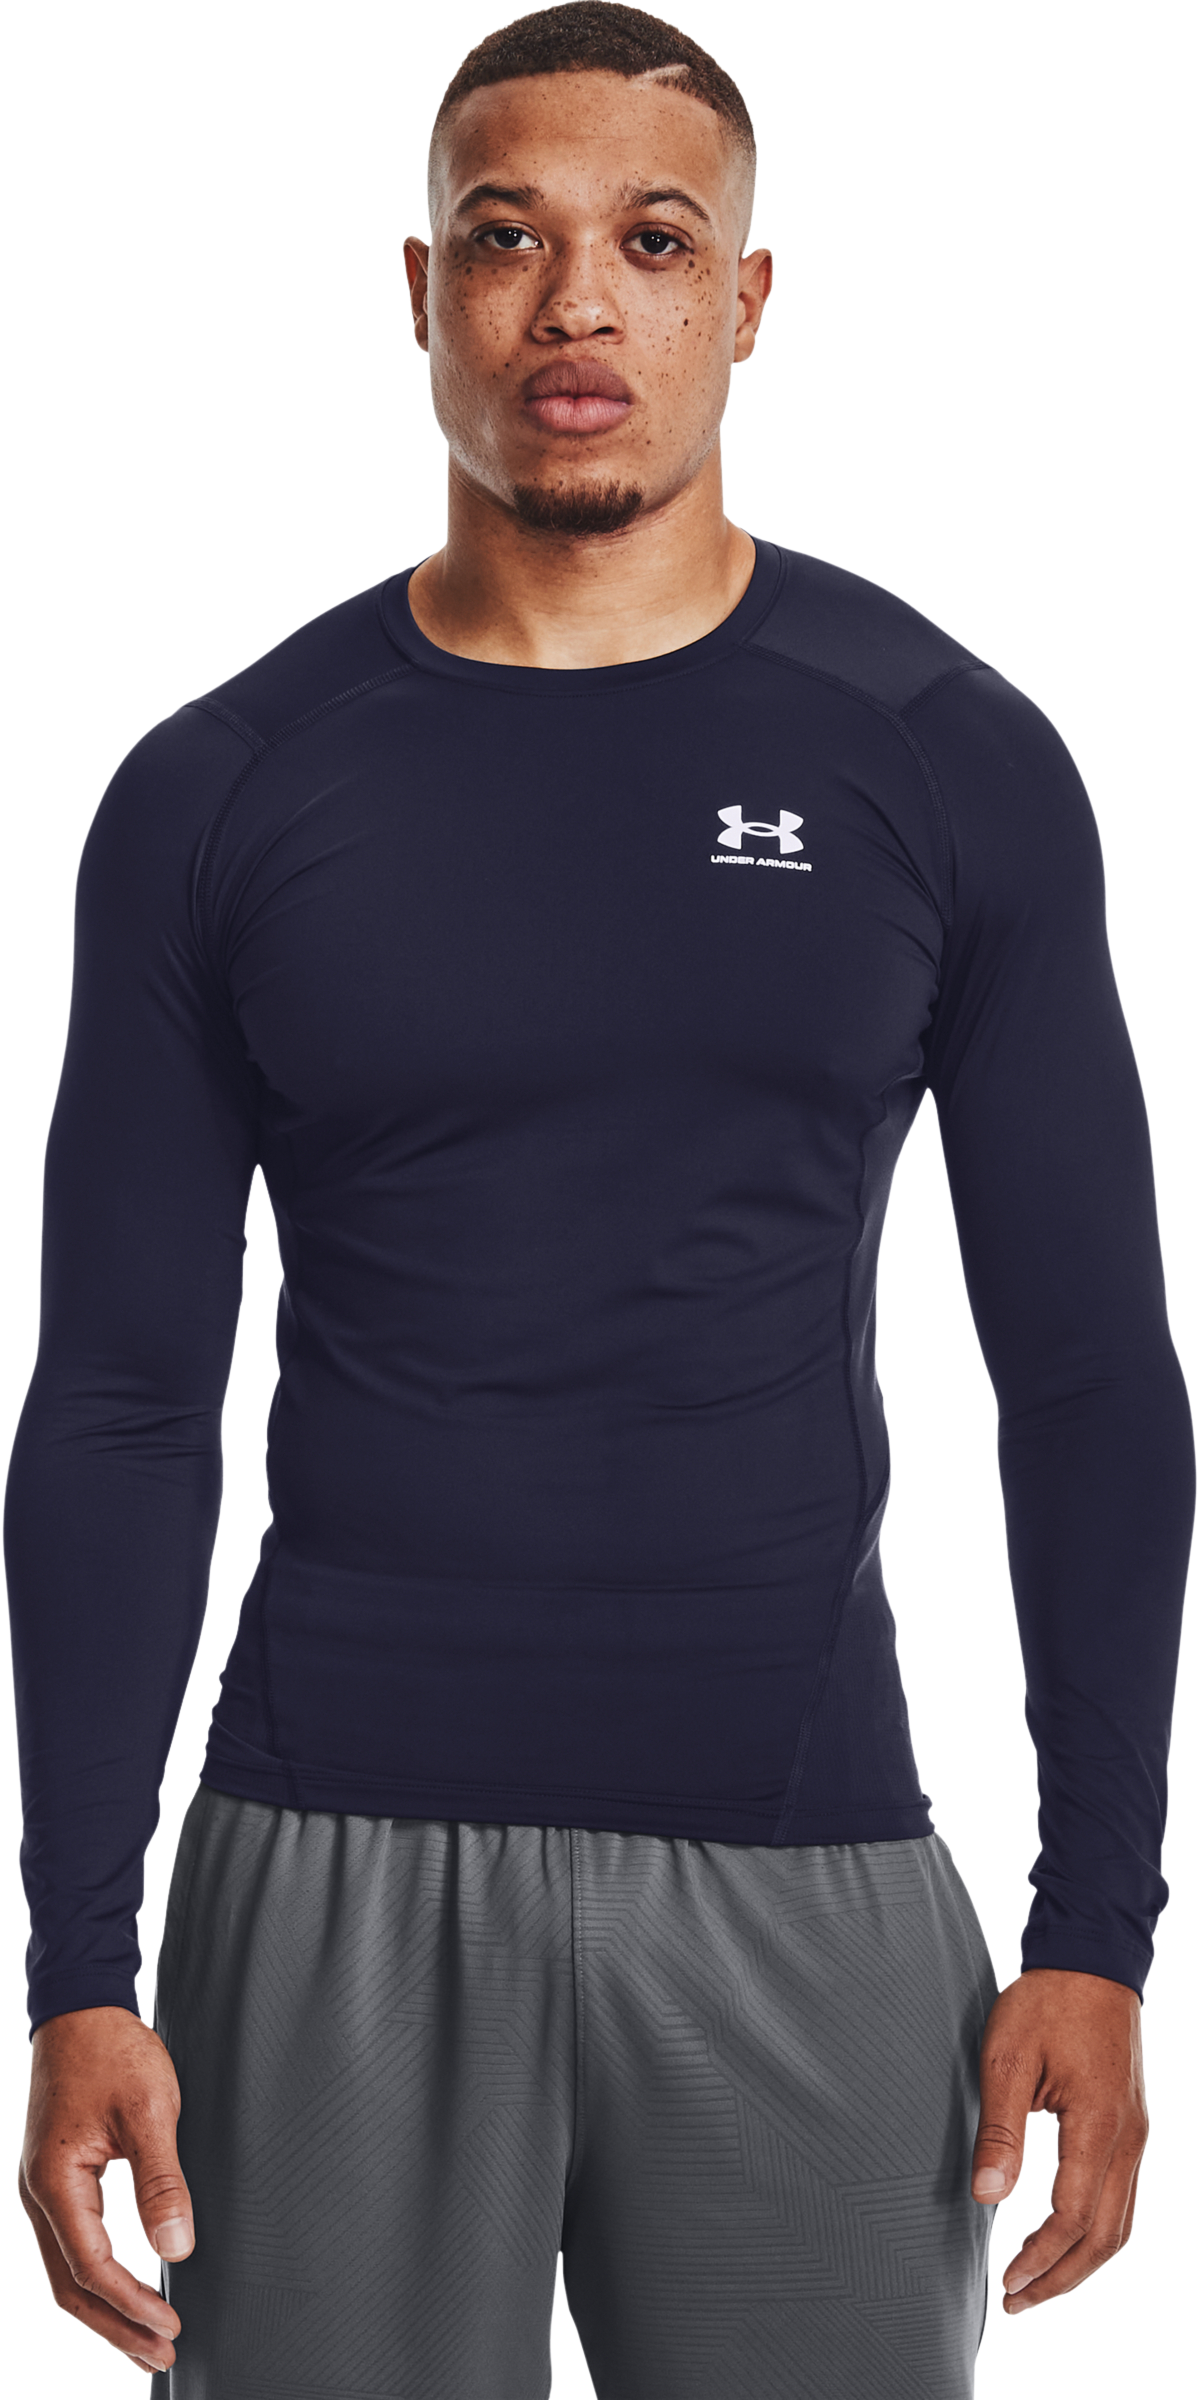 HeatGear Armour Long Sleeve Compression T-Shirt by Under Armour